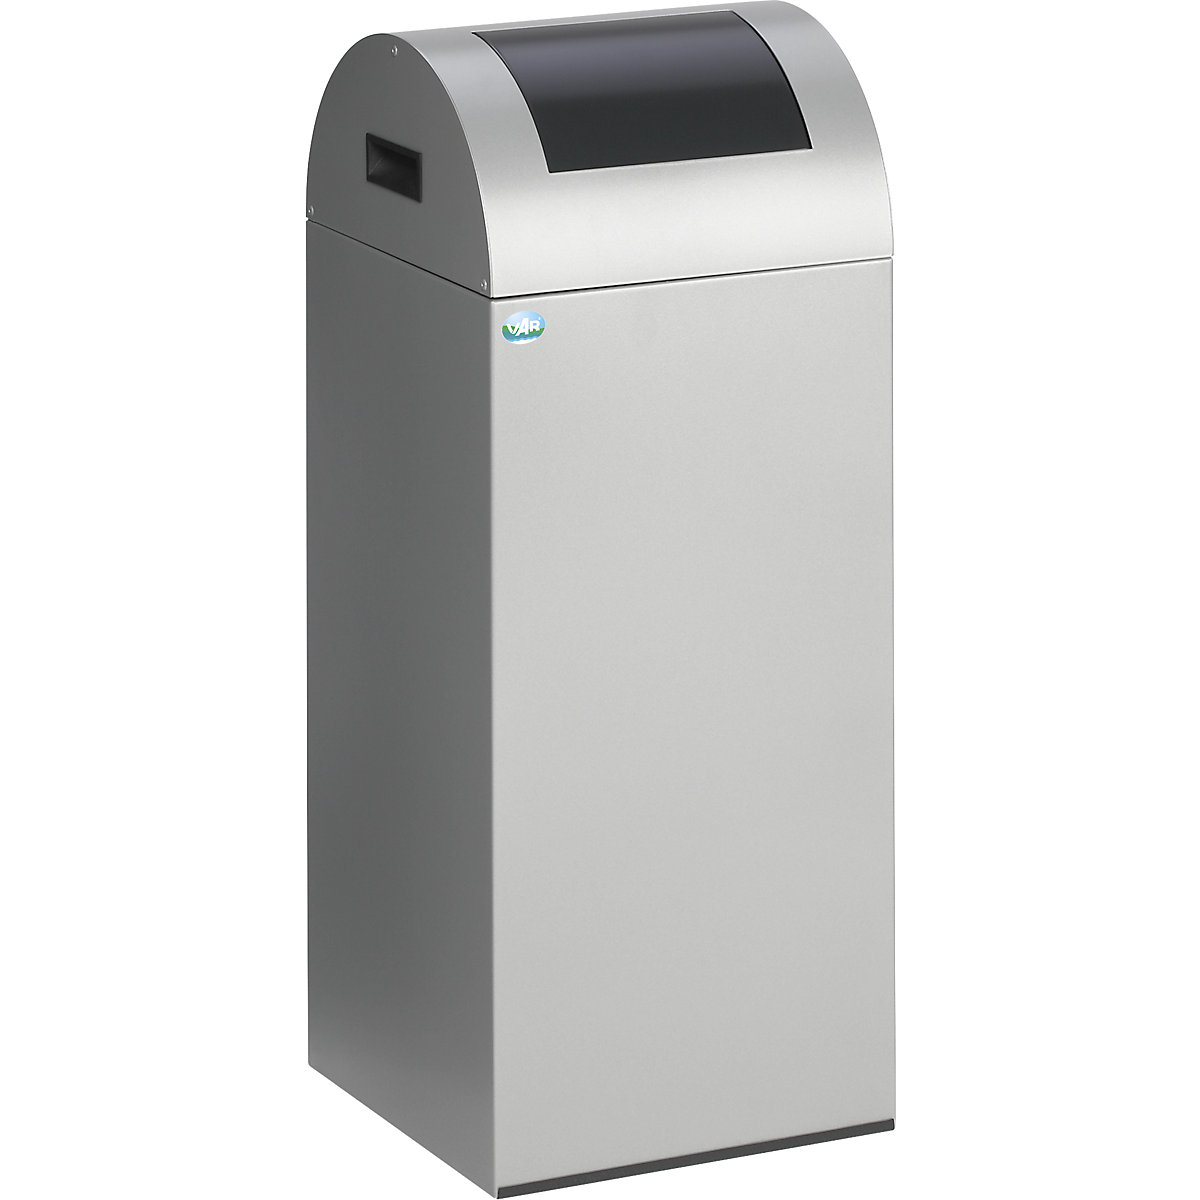 Self extinguishing recyclable waste collector – VAR